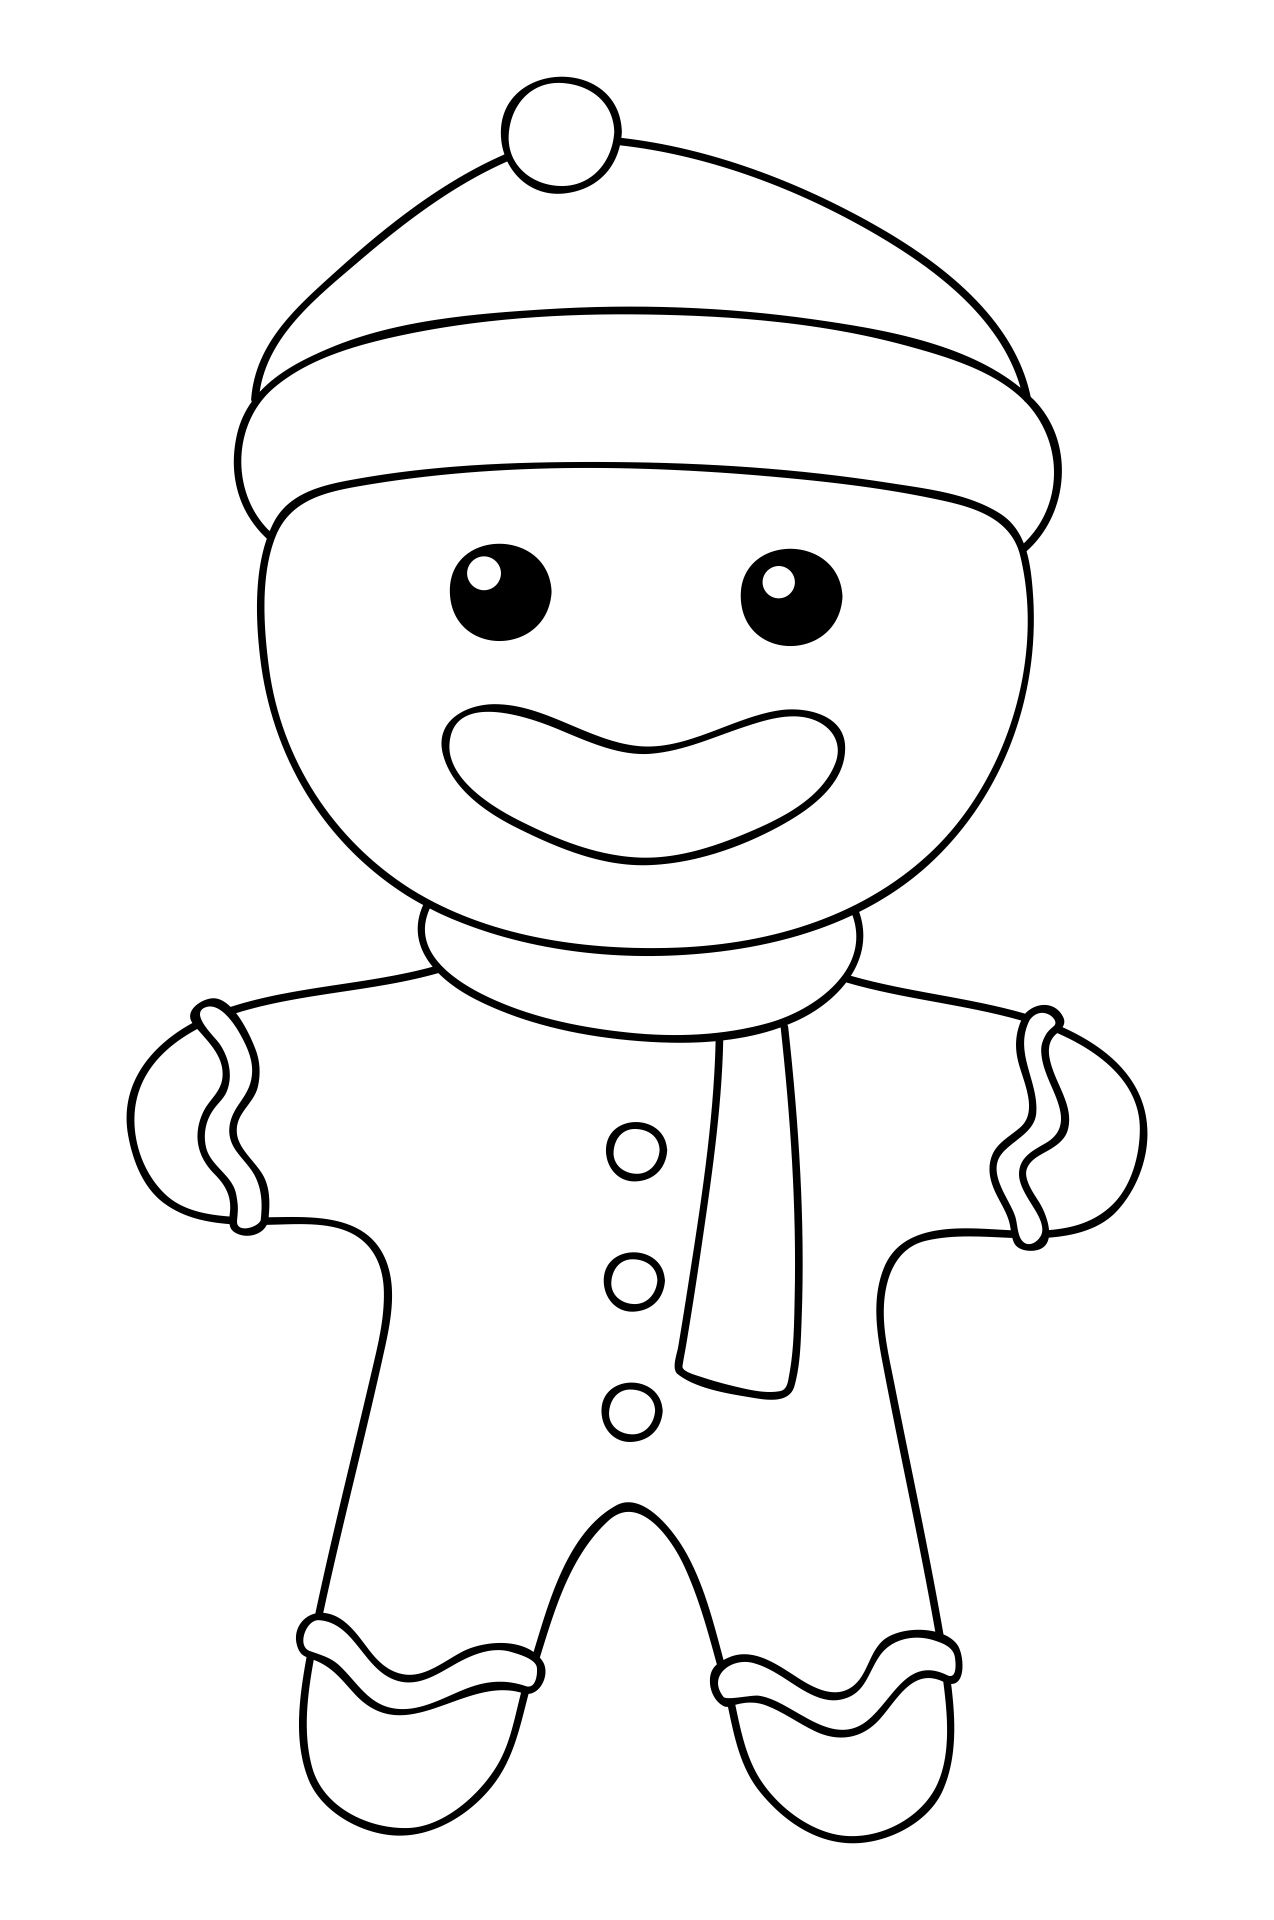 Blank Gingerbread Man Coloring Page Printable